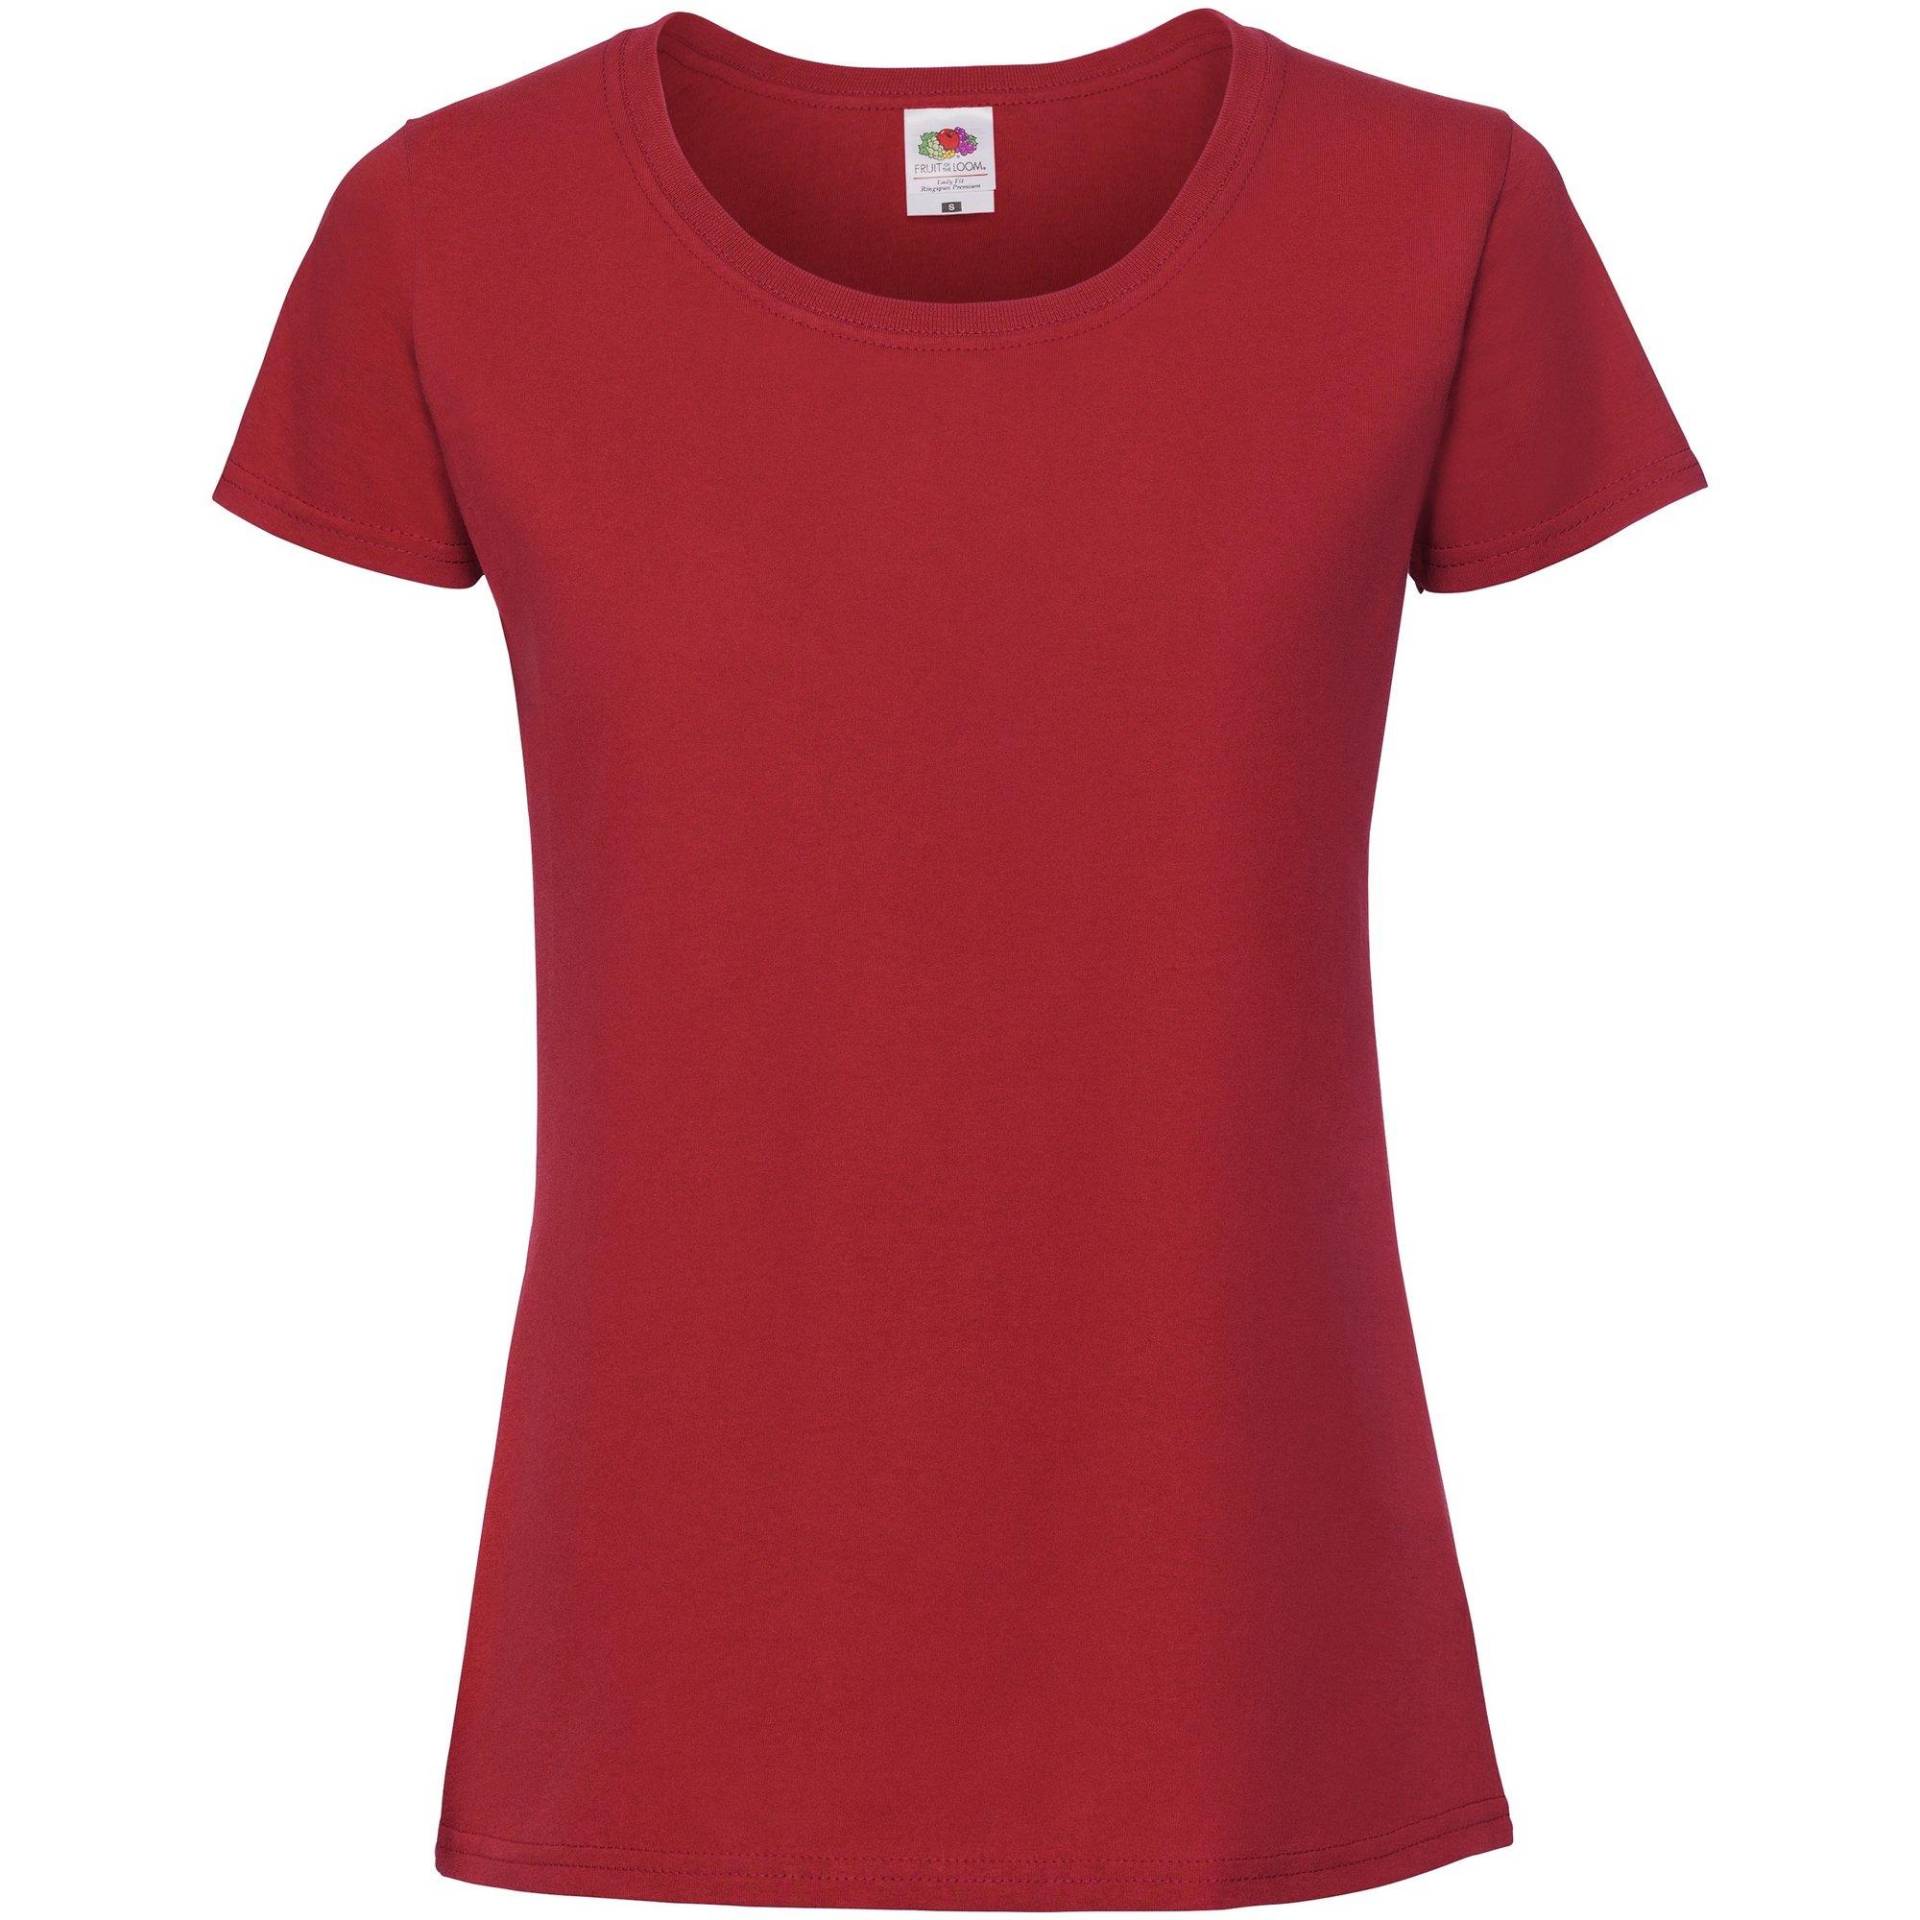 Fruit Of The T-shirt, Enganliegend Damen Rot Bunt L von Fruit of the Loom